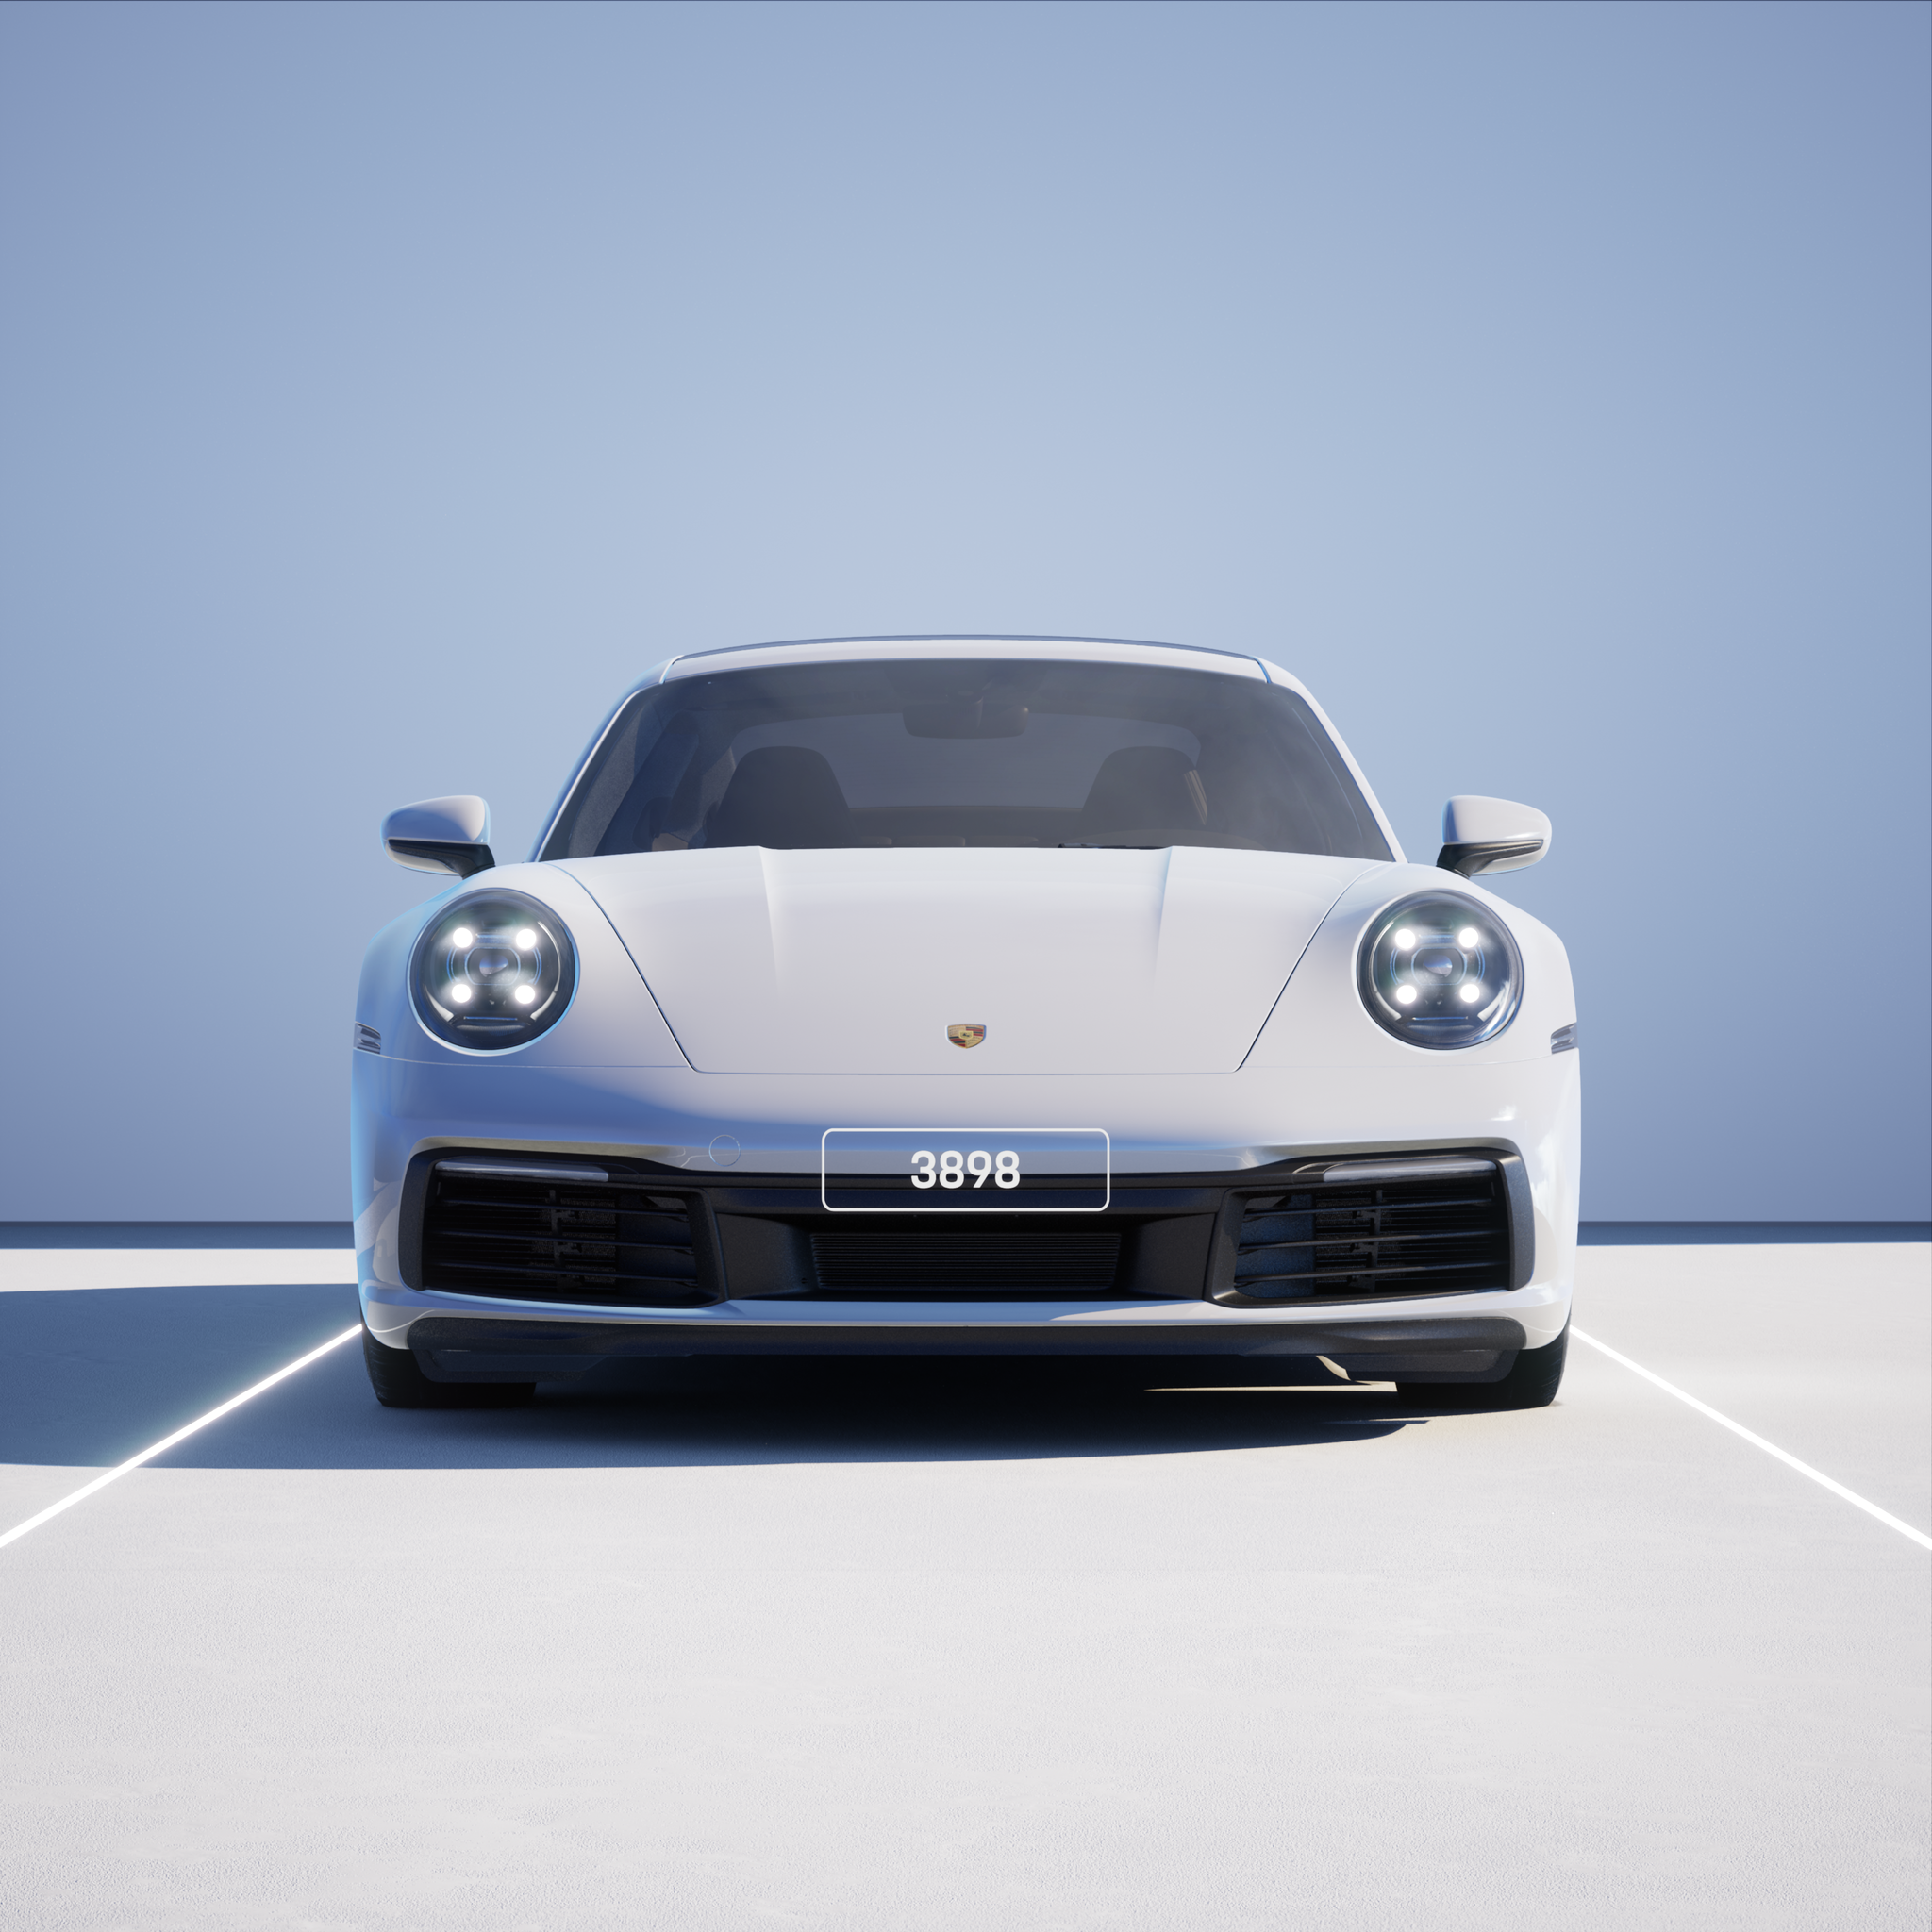 The PORSCHΞ 911 3898 image in phase